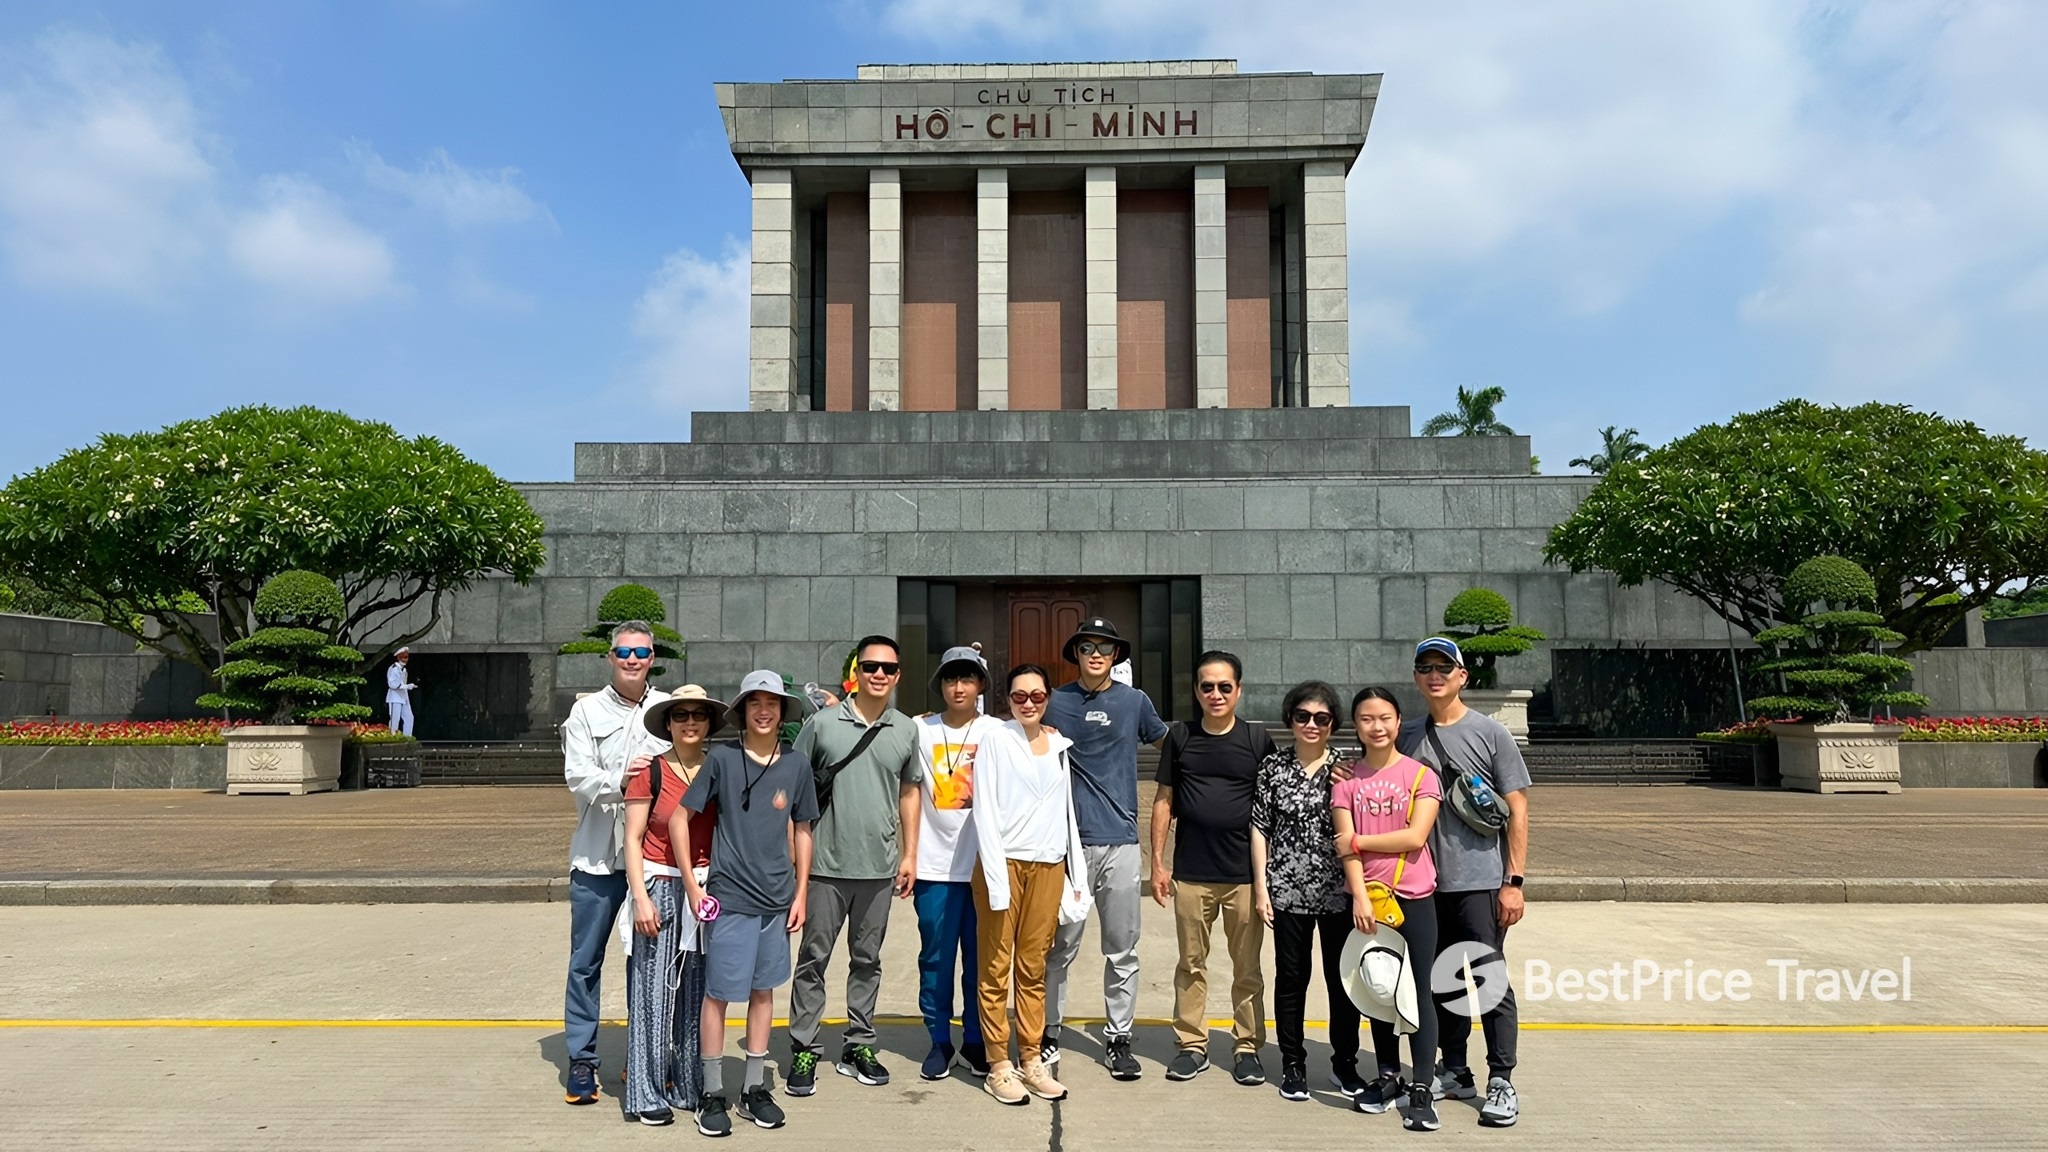 Ho Chi Minh Mausoleum Holds Great Renown Among Visitors To Hanoi